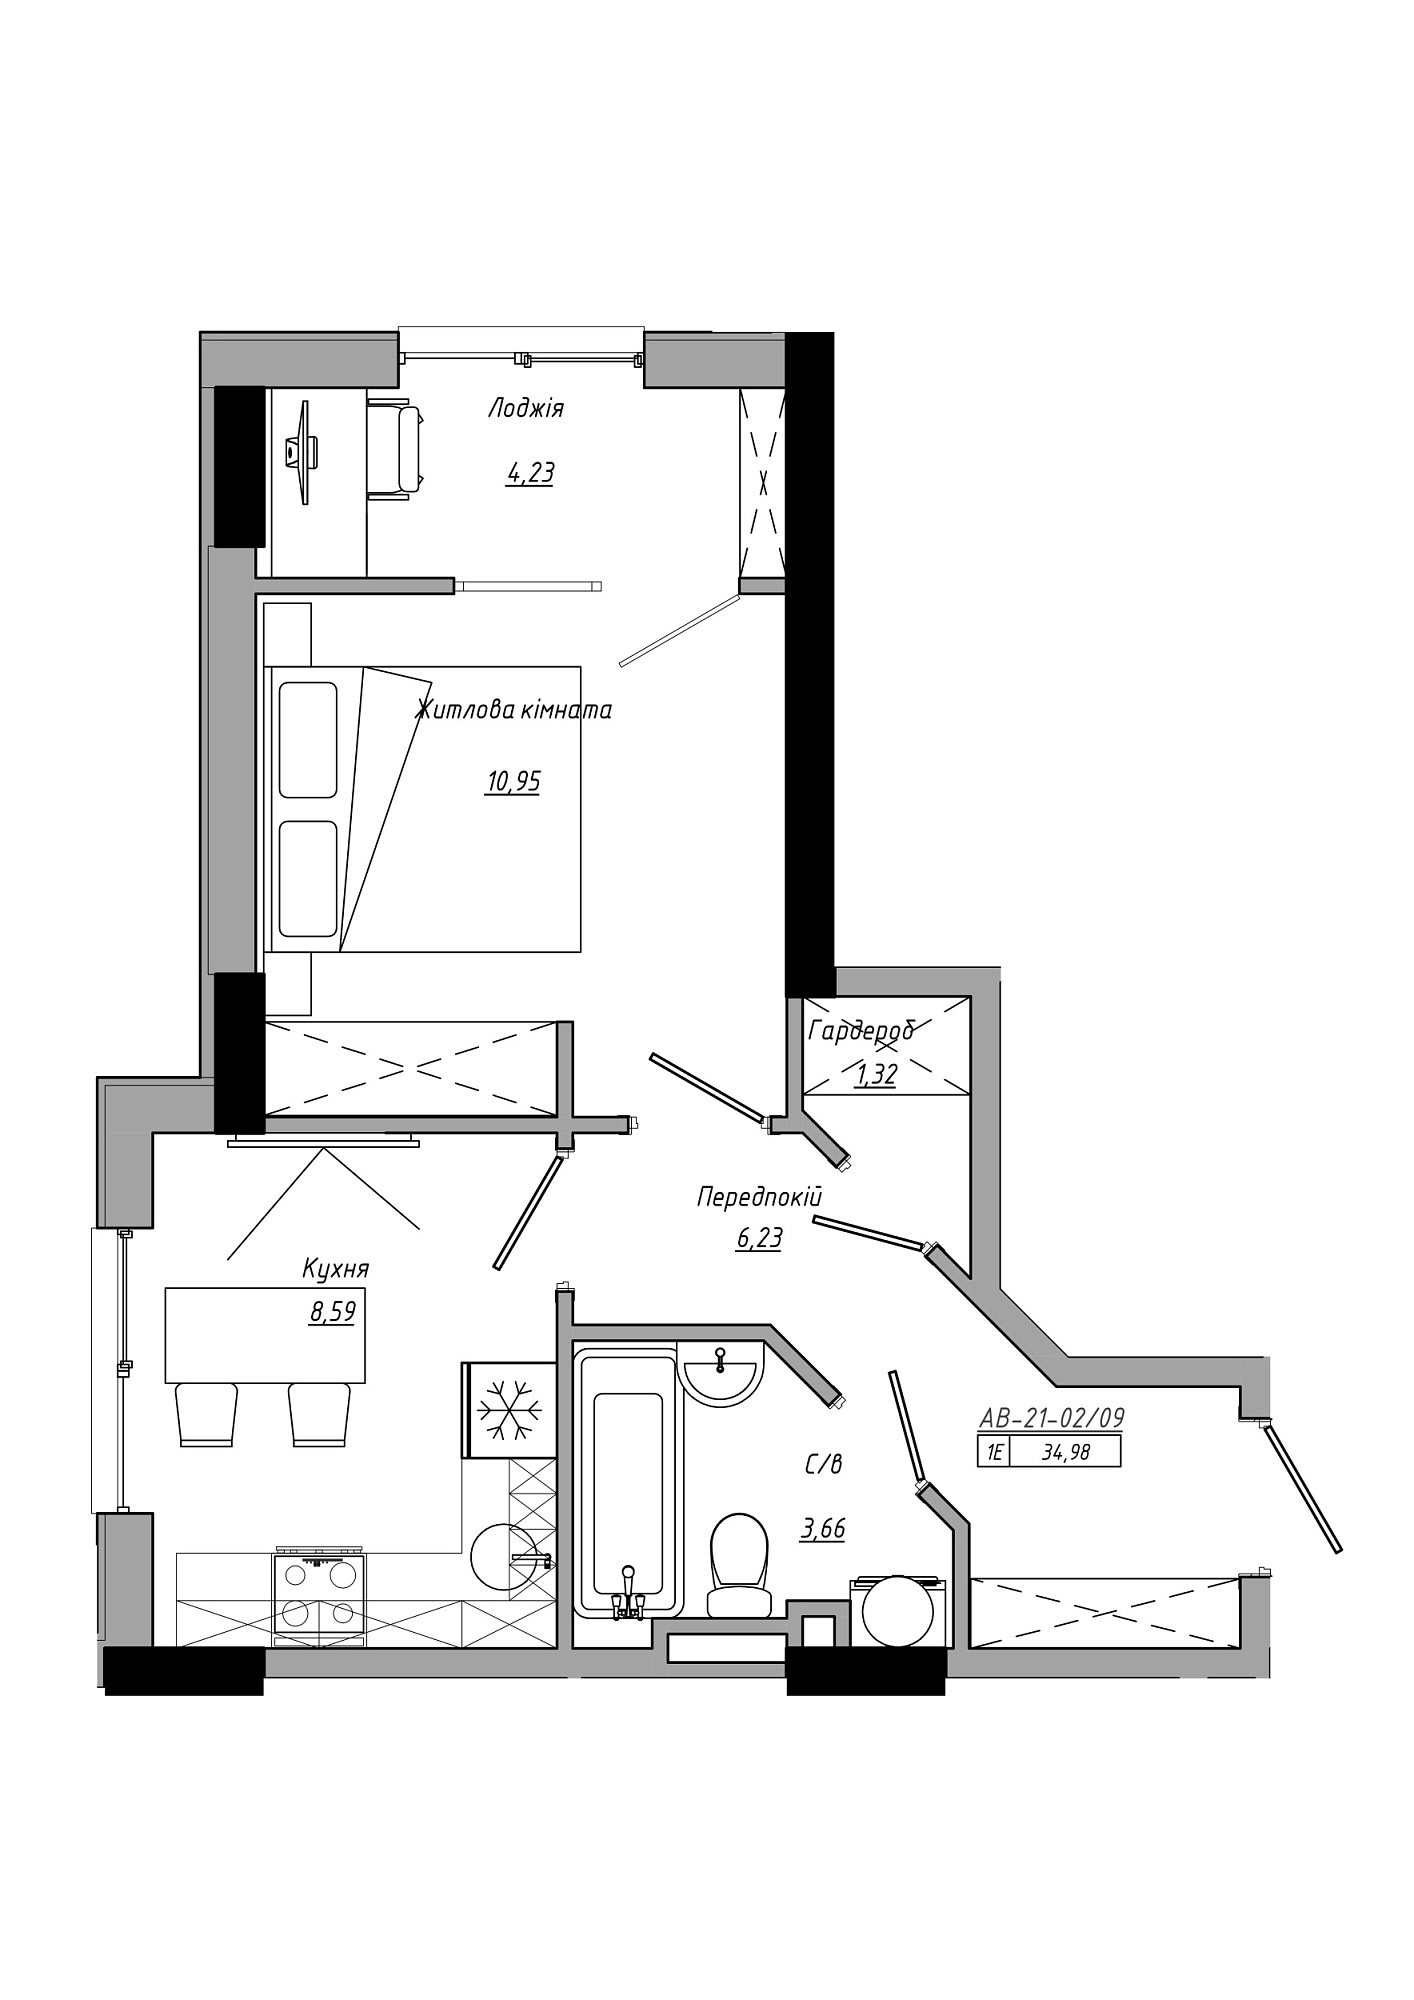 Planning 1-rm flats area 34.98m2, AB-21-02/00009.